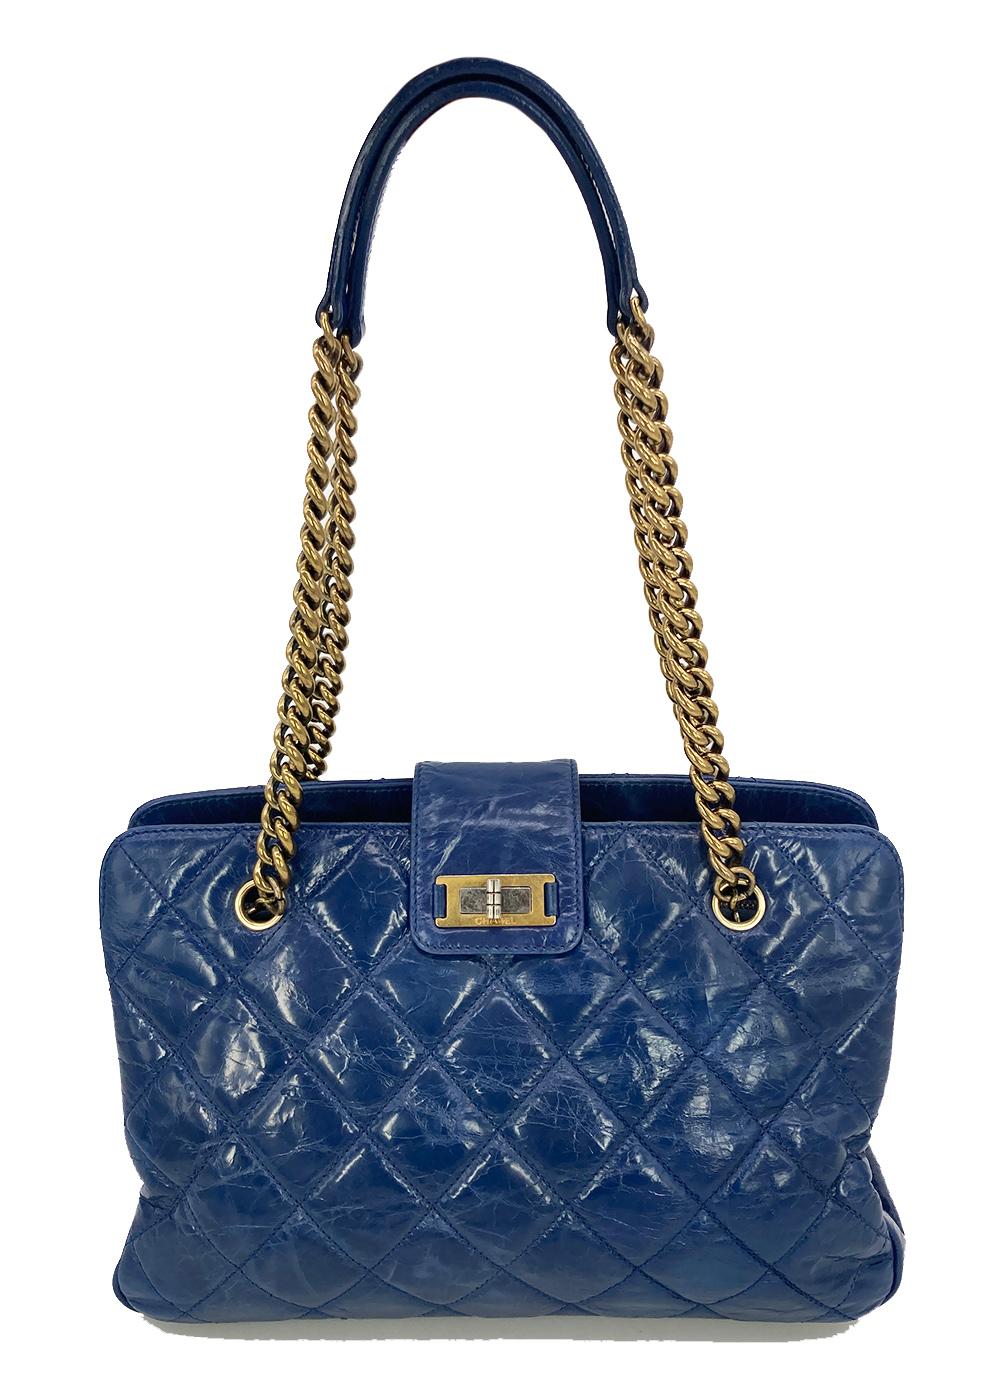 Chanel Blue Glazed Calfskin Quilted Tote Bag For Sale 3